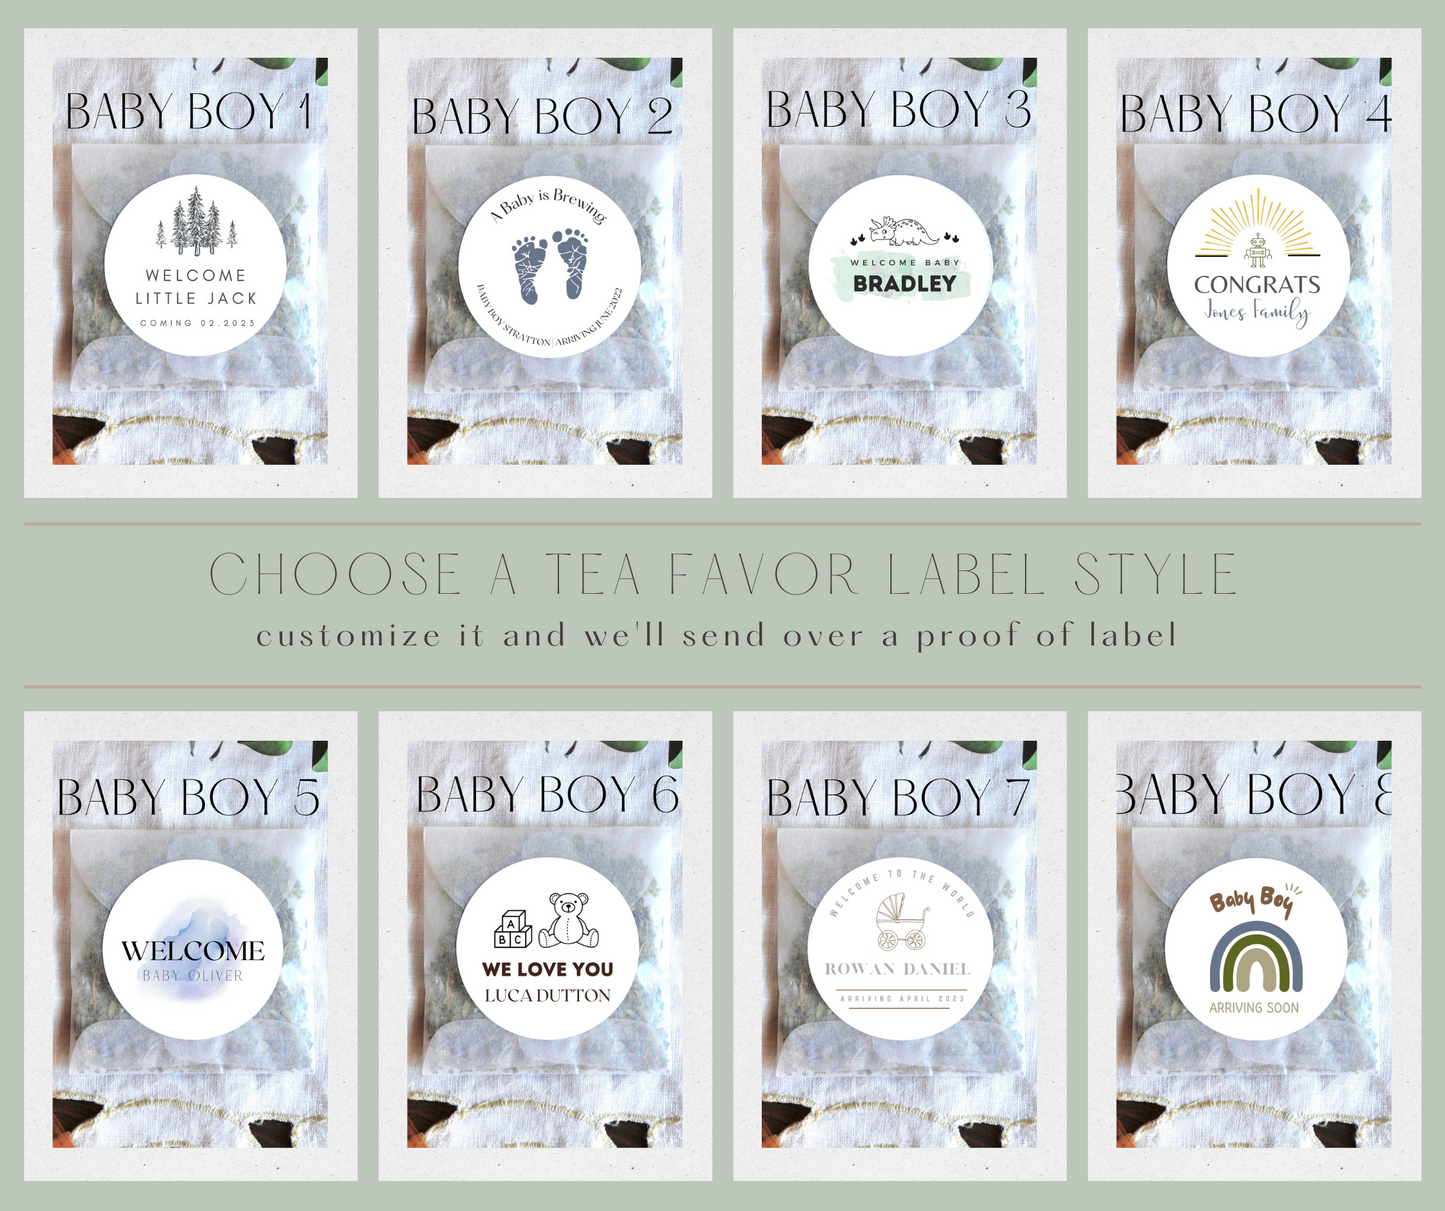 PERSONALIZED Glassine Tea Favor | Baby Shower, Thank You, ParTEA Gifts | Artisan Handcrafted Loose Leaf Teas | 25 ct